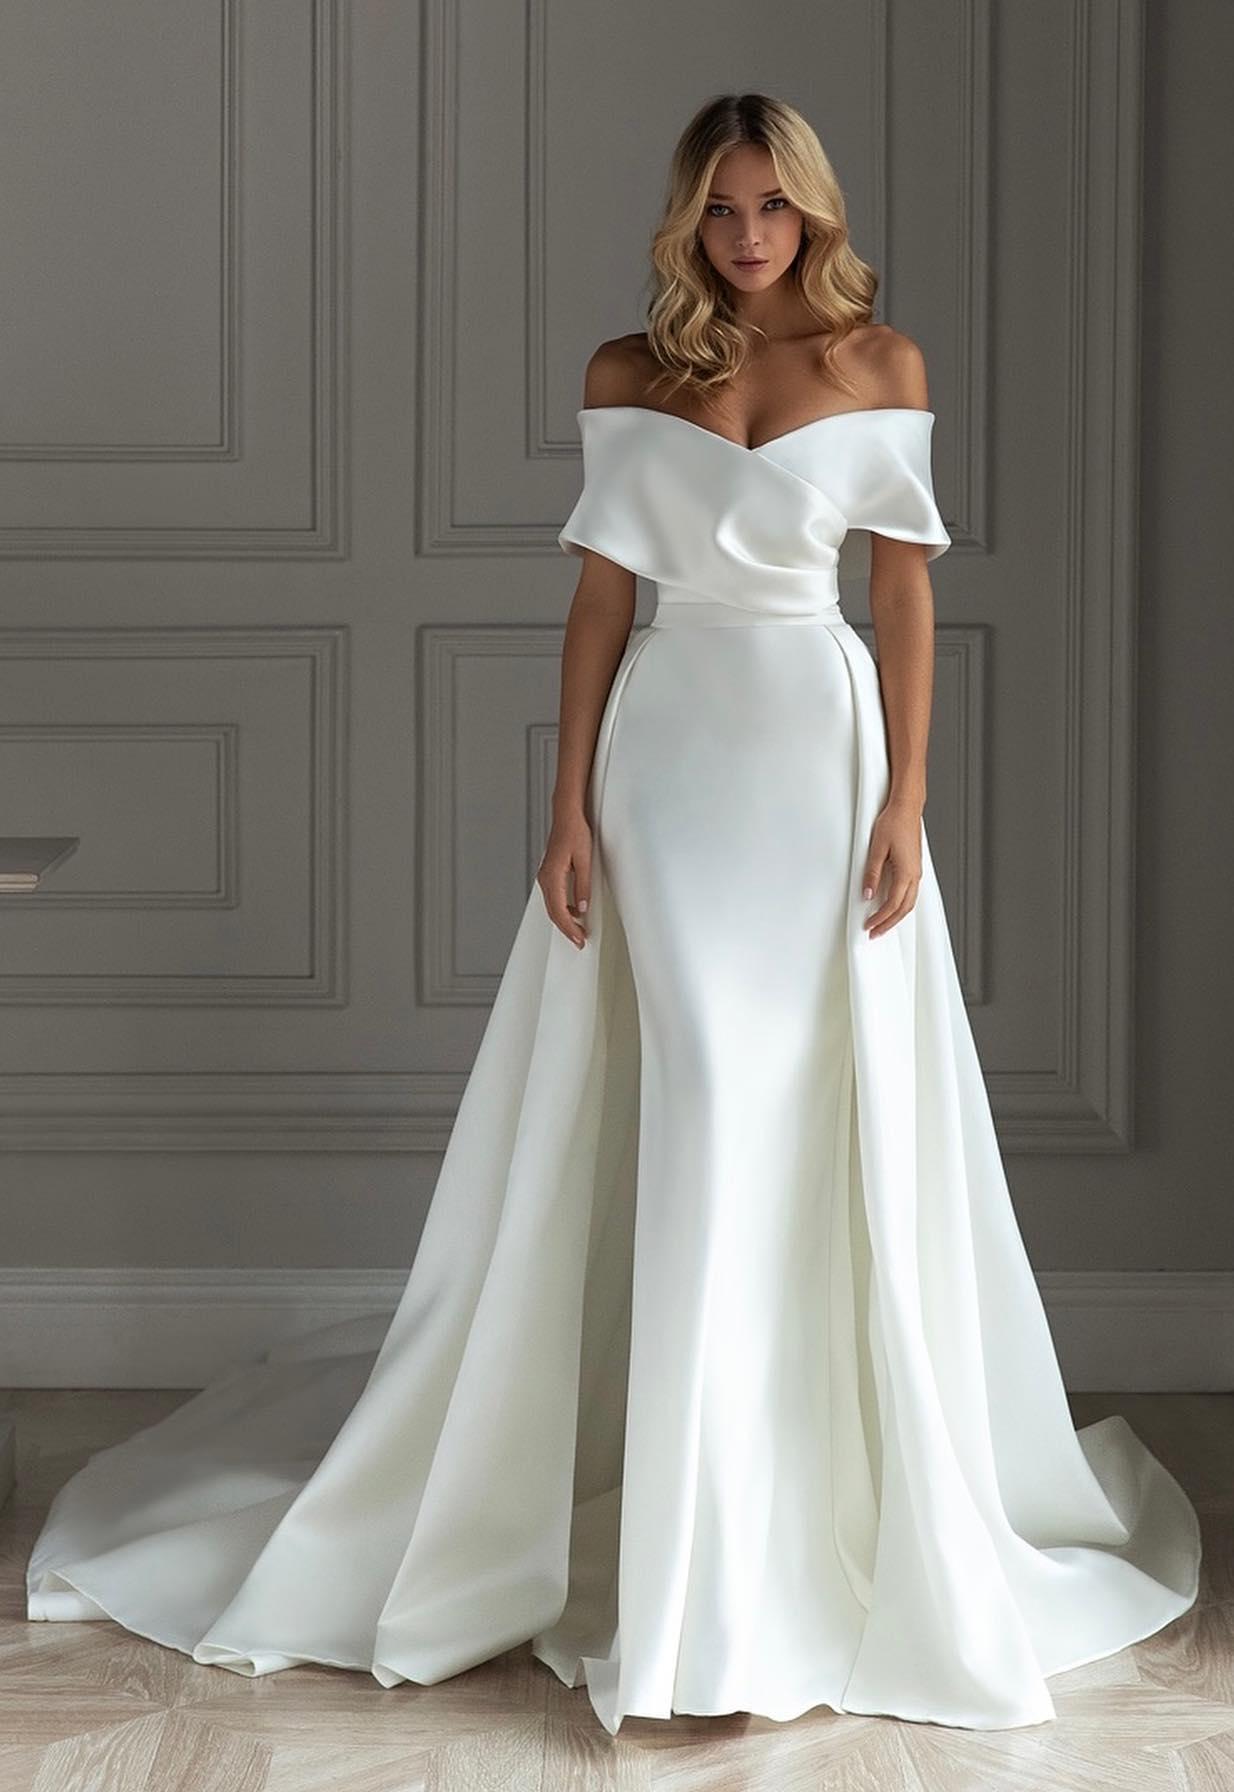 Plus Size Arabic Mermaid Plus Size Wedding Gowns With Simple Crystals And  Sweetheart Satin Elegant Bridal Dress ZJ302 From Chic_cheap, $119.04 |  DHgate.Com